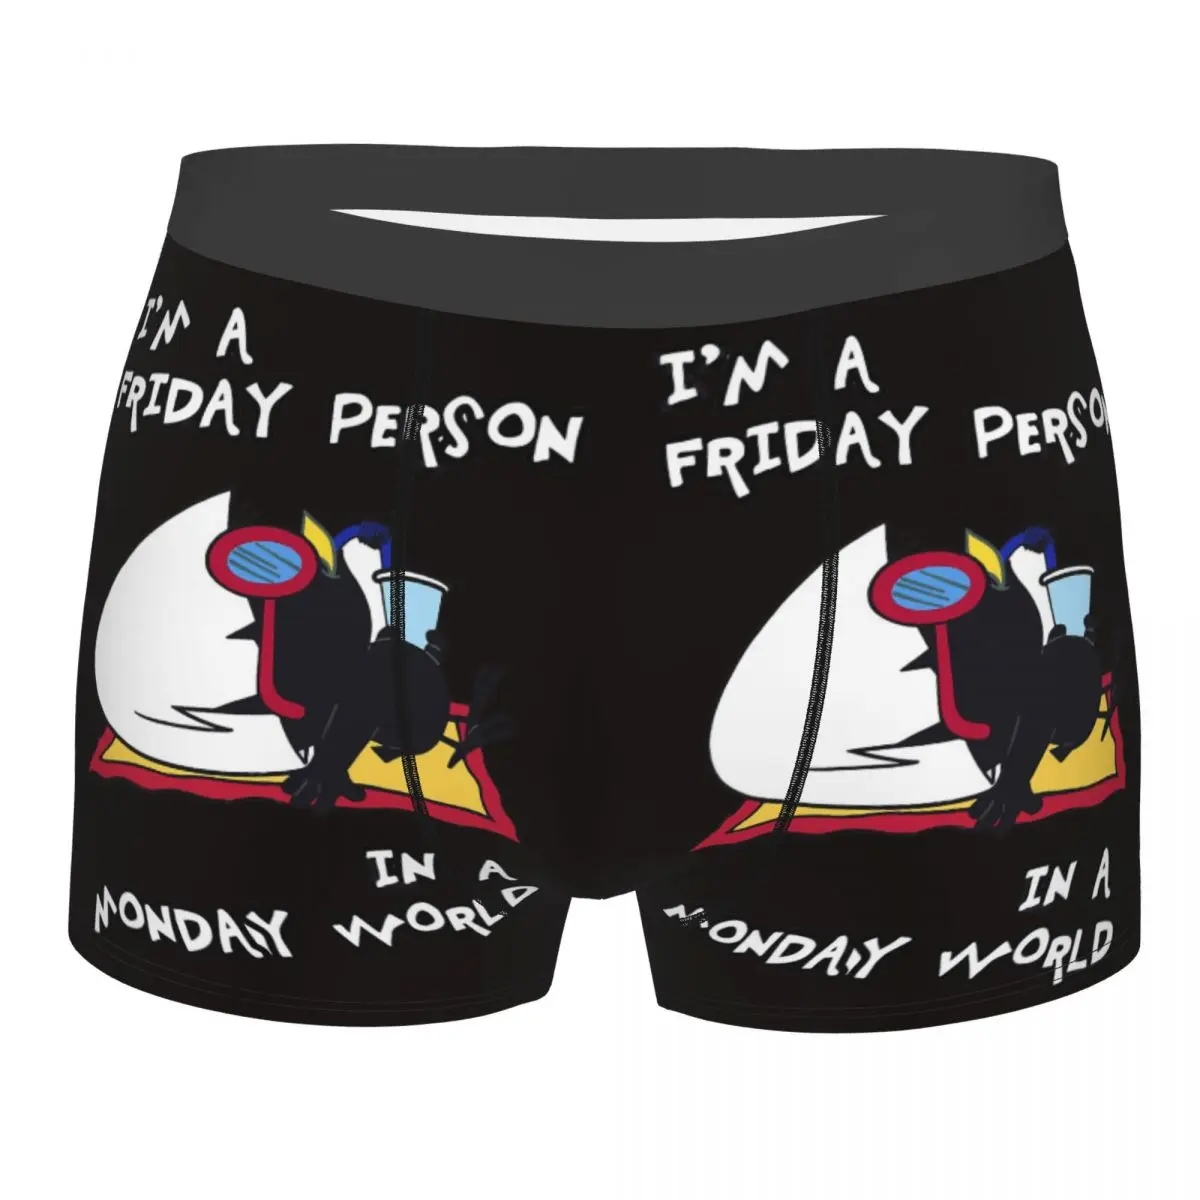 I'm A Friday Person In A Monday World Men Boxer Briefs Calimero Highly Breathable Underpants High Quality Print Shorts Gift Idea 1pcs lot tibetan dzi books dzi collection appreciation world high end cultural collection map tibetan nine eyed dzi beads book